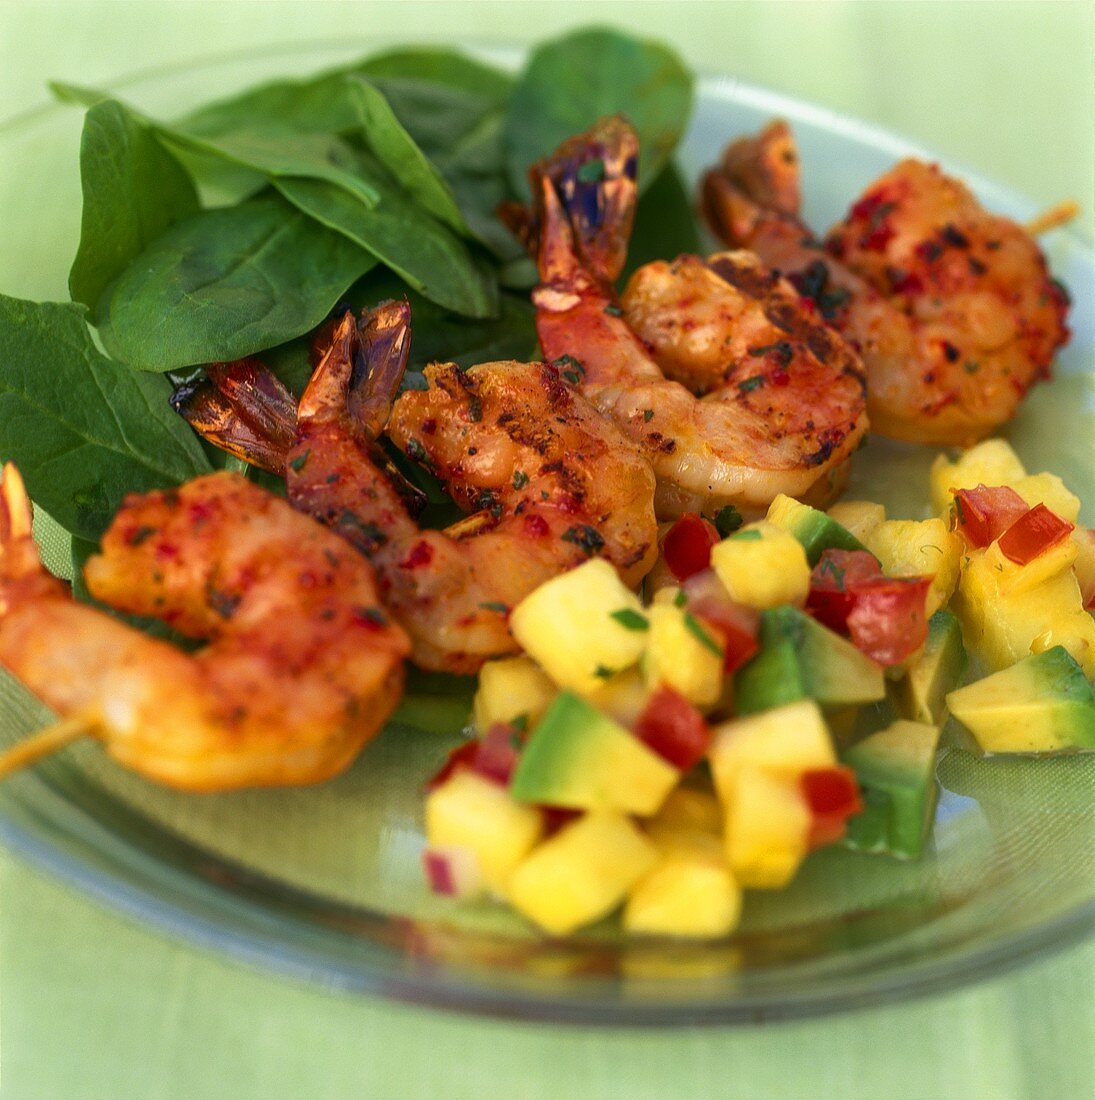 Shrimp kebab with spinach and pineapple and avocado salsa